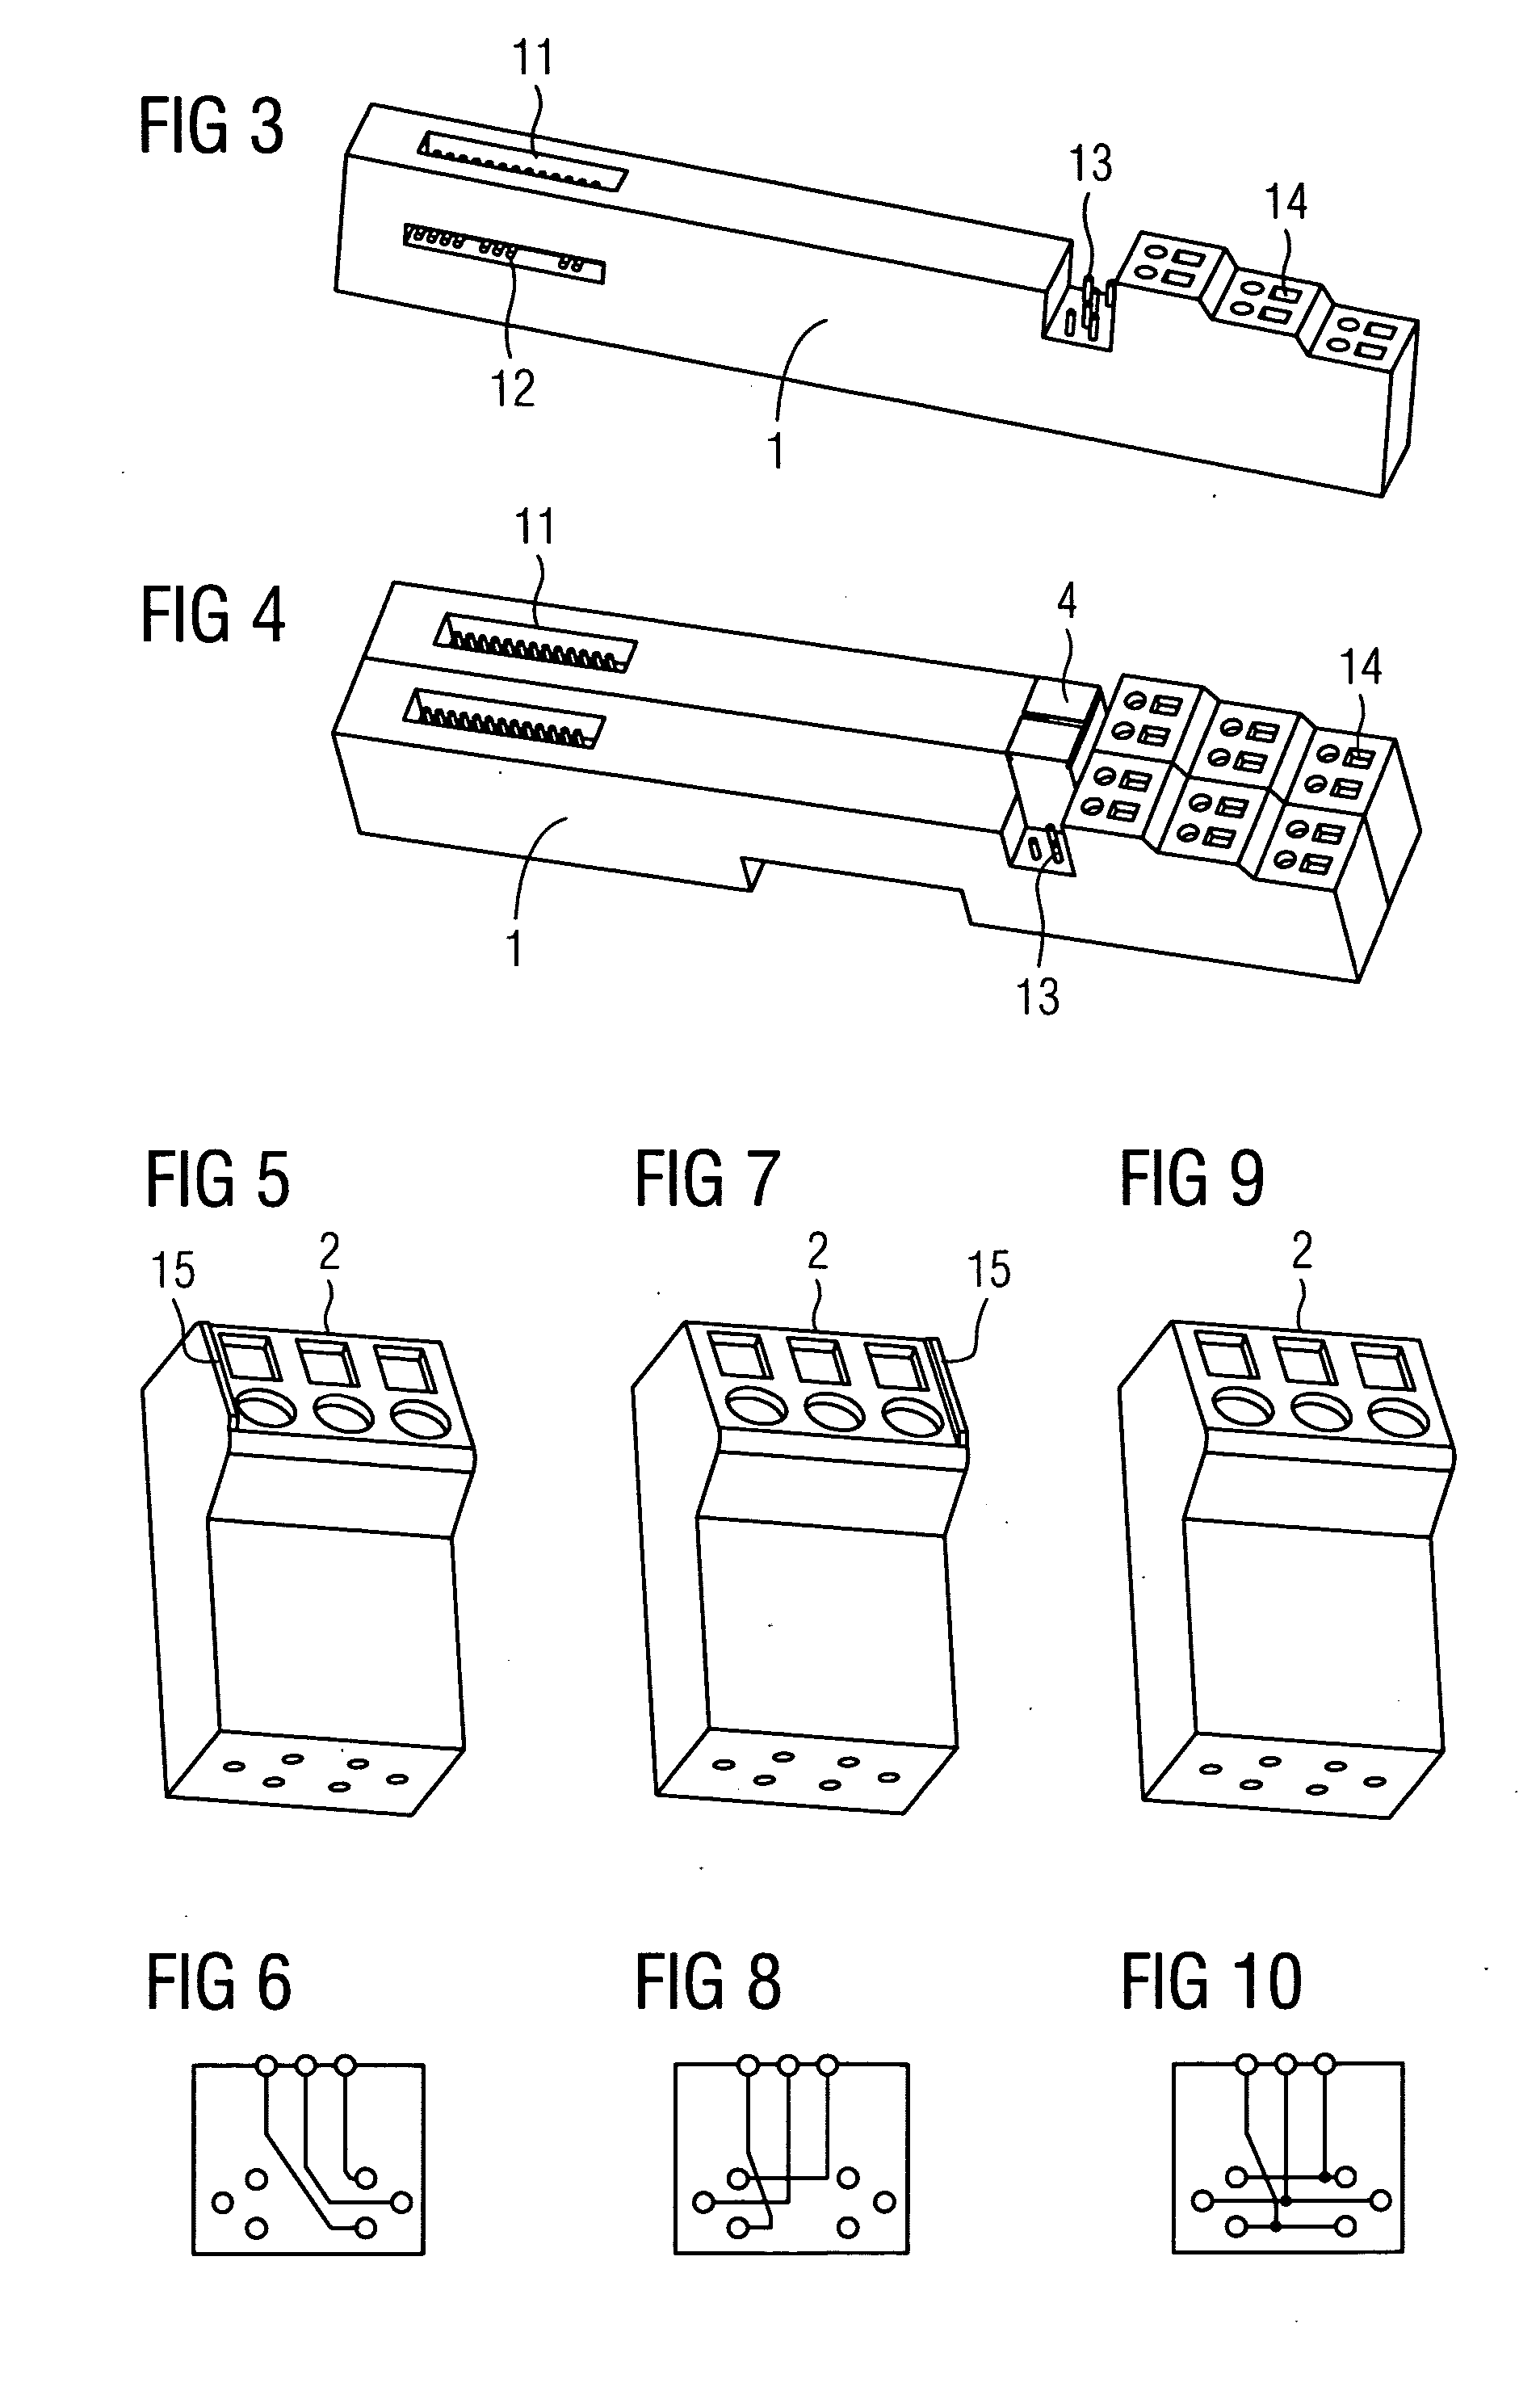 Modular control system with terminal and function modules